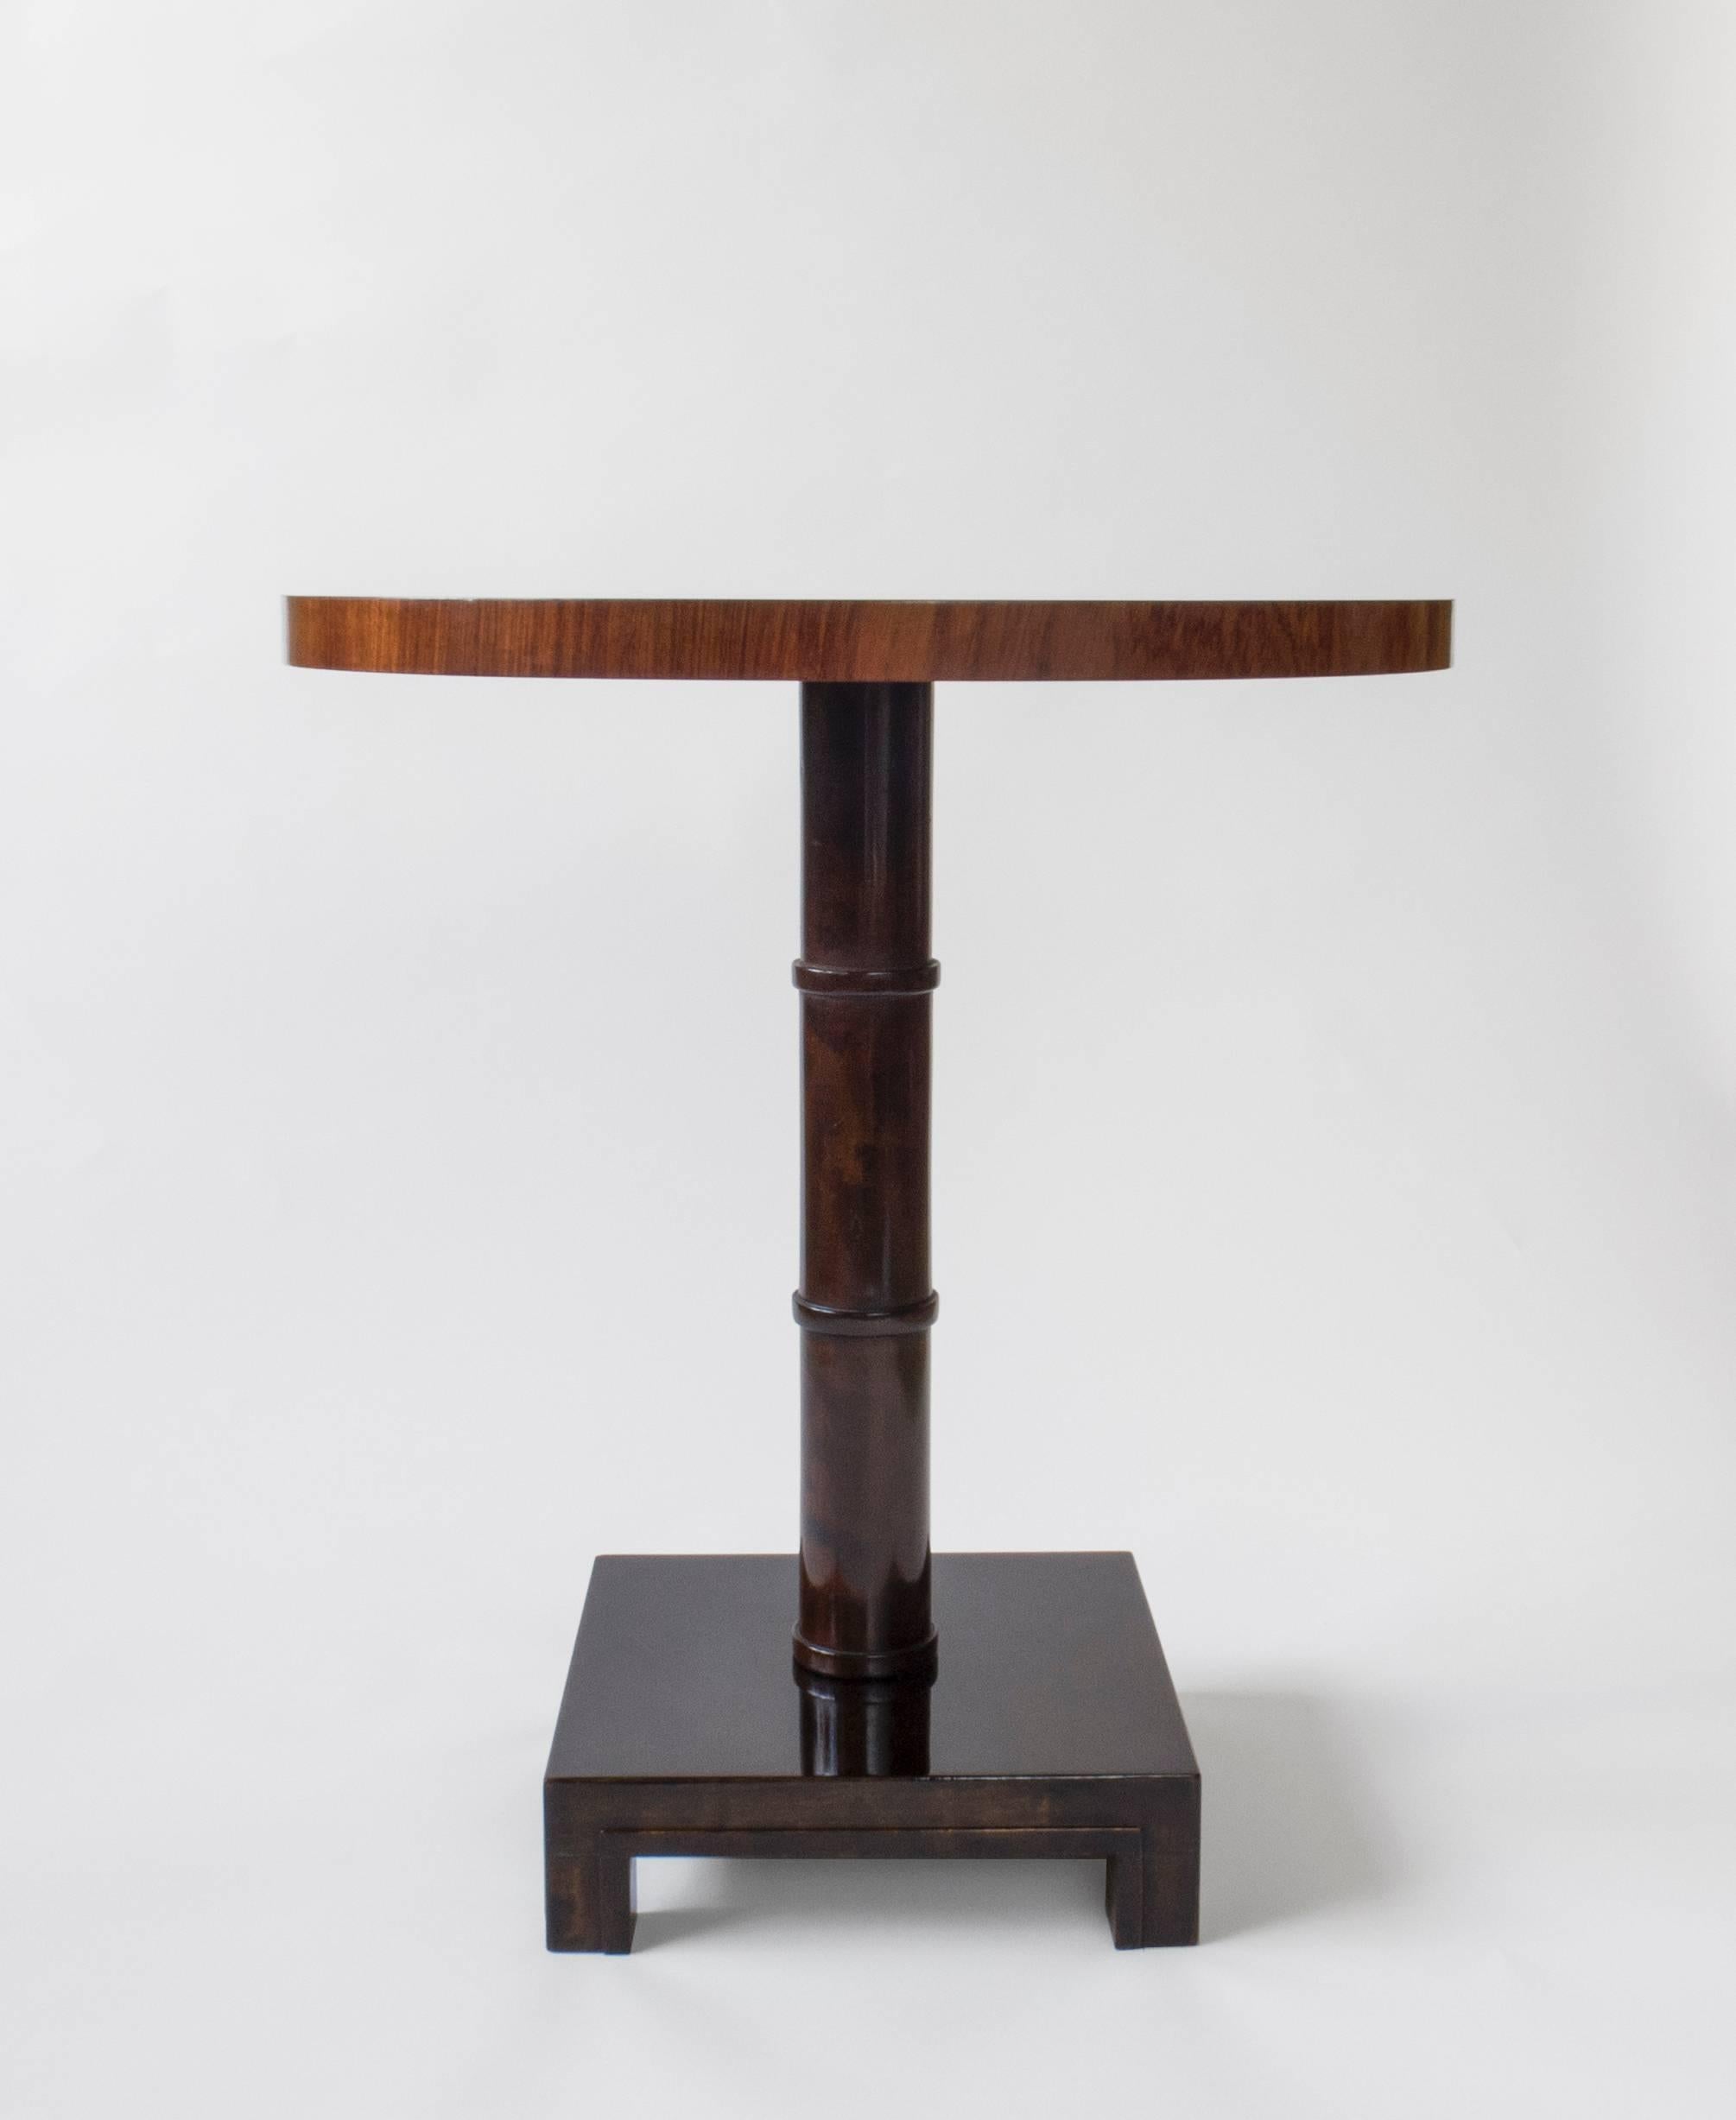 Swedish Axel Einar Hjorth, Attributed Zebrawood and Birch Small Drinks or Side Table